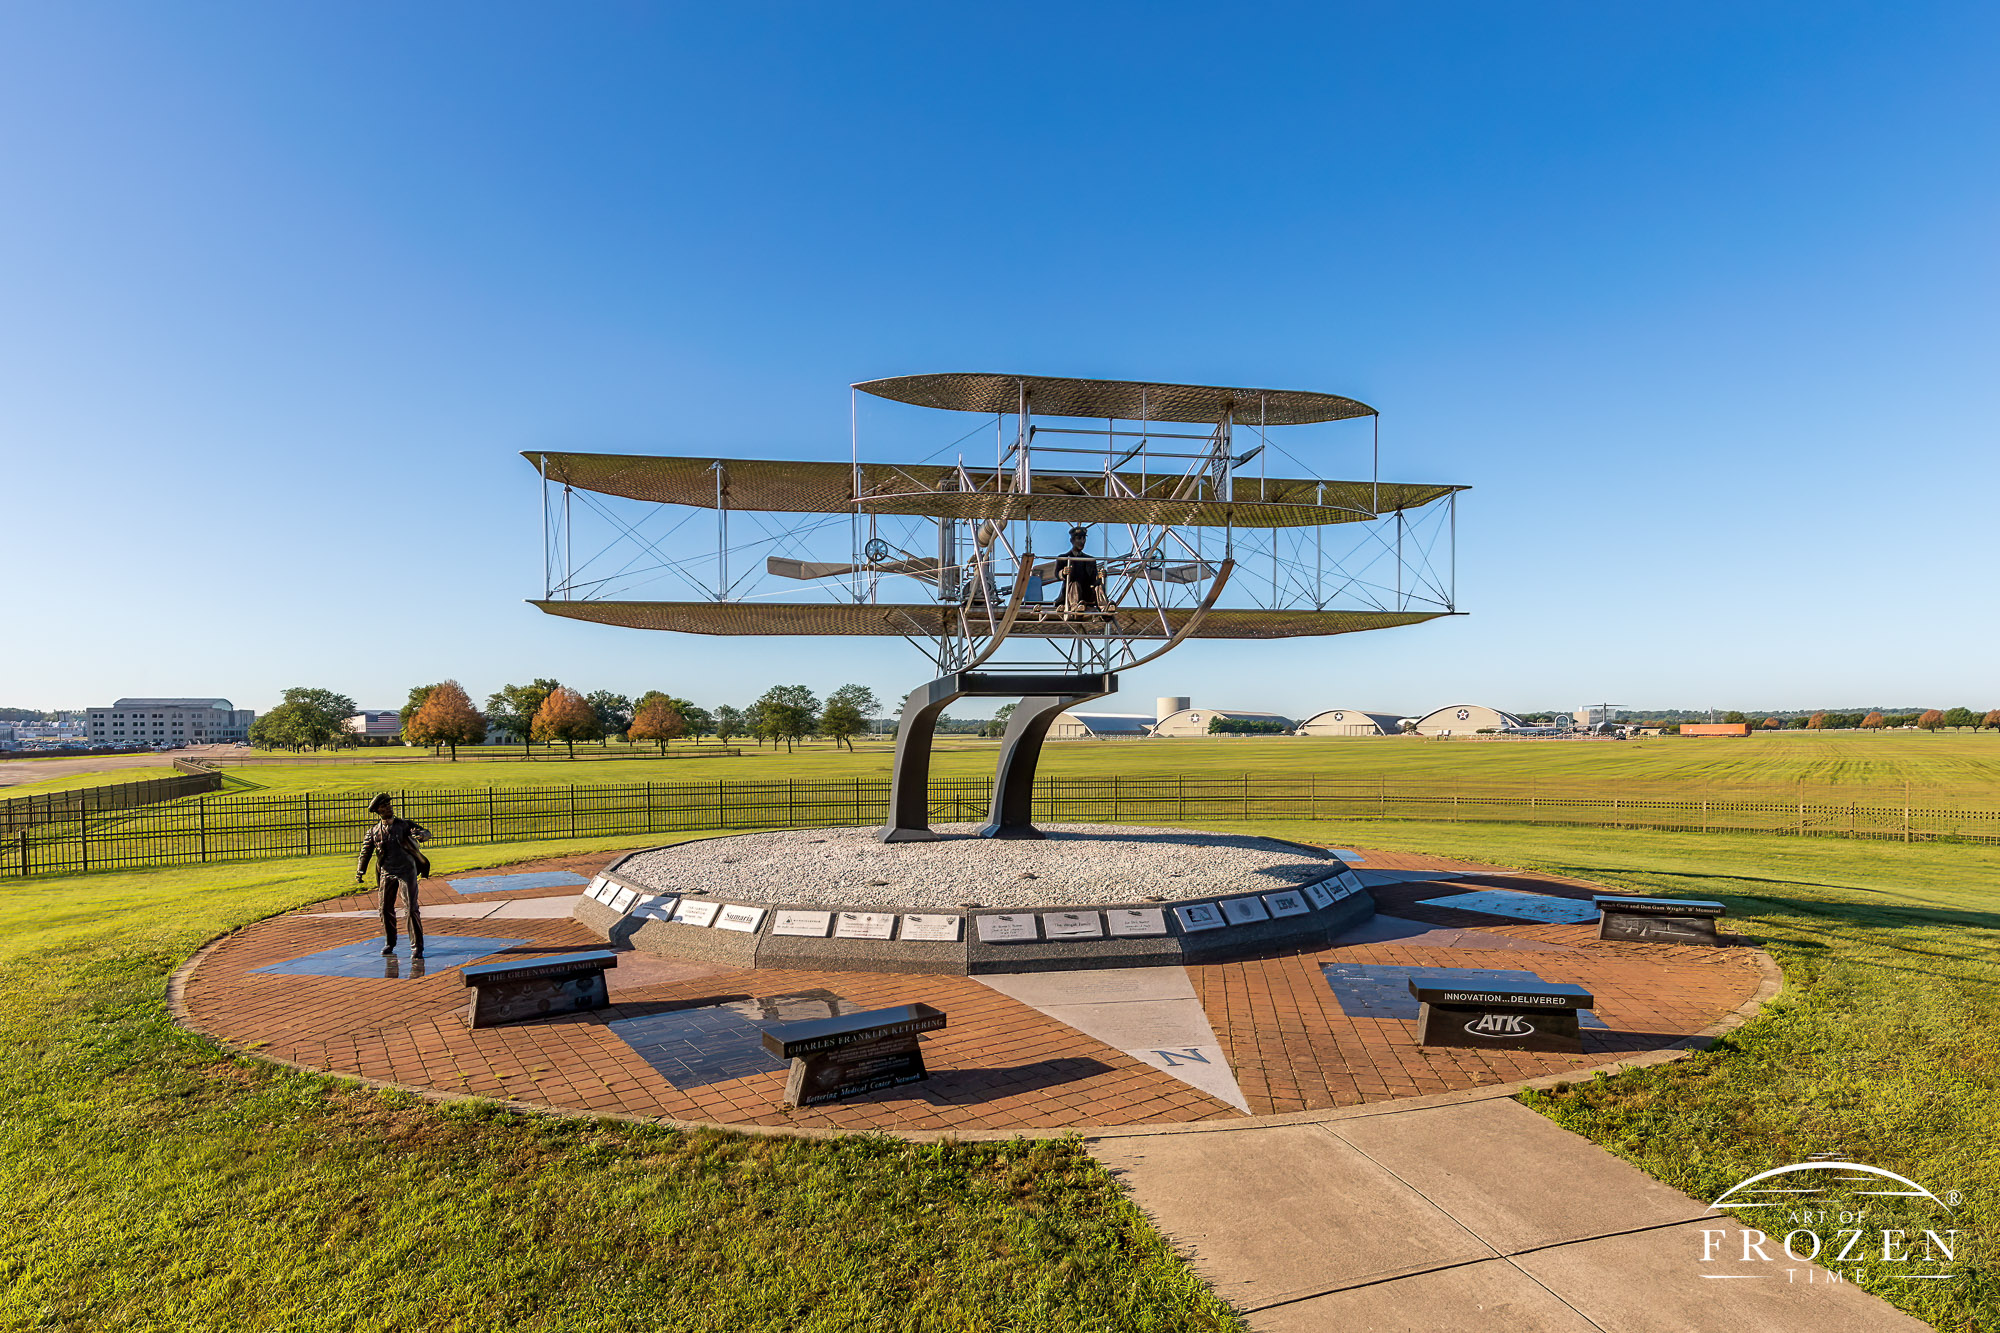 A replica of the 1909 Wright Flyer appears to have just taken flight outside WPAFB gate as morning golden lights shines on the sculpture